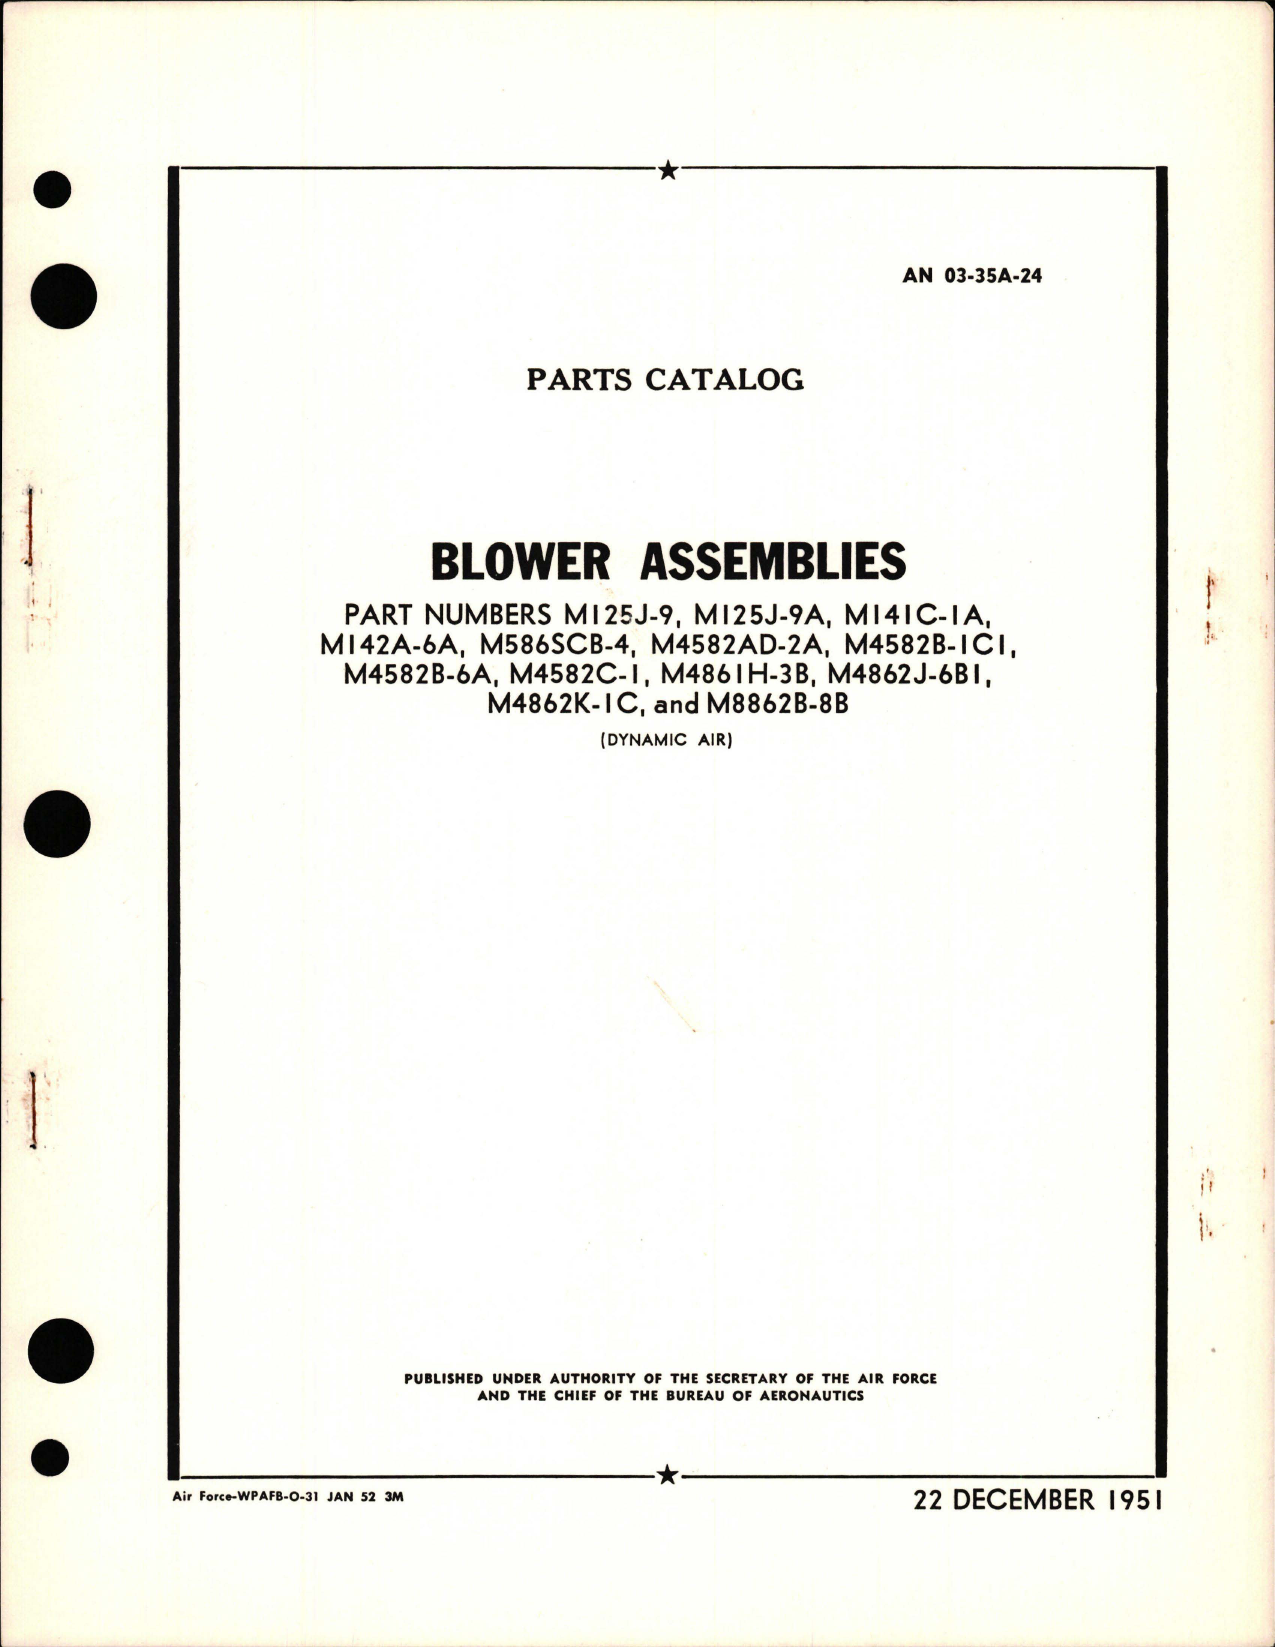 Sample page 1 from AirCorps Library document: Parts Catalog for Blower Assemblies